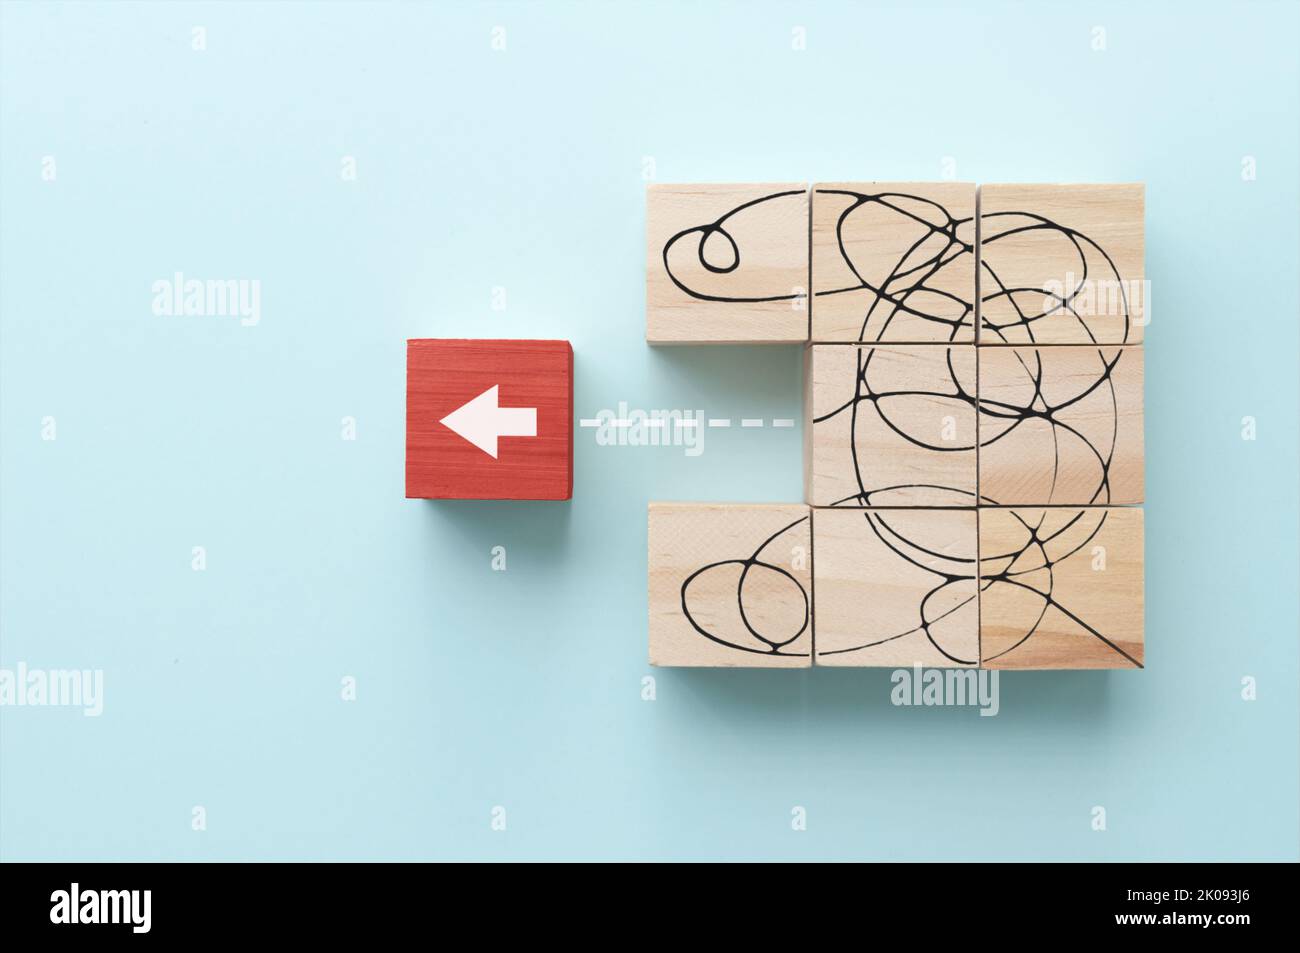 Messy line sketched on wooden blocks leading to arrow, solving complex problems, exit strategy concept Stock Photo